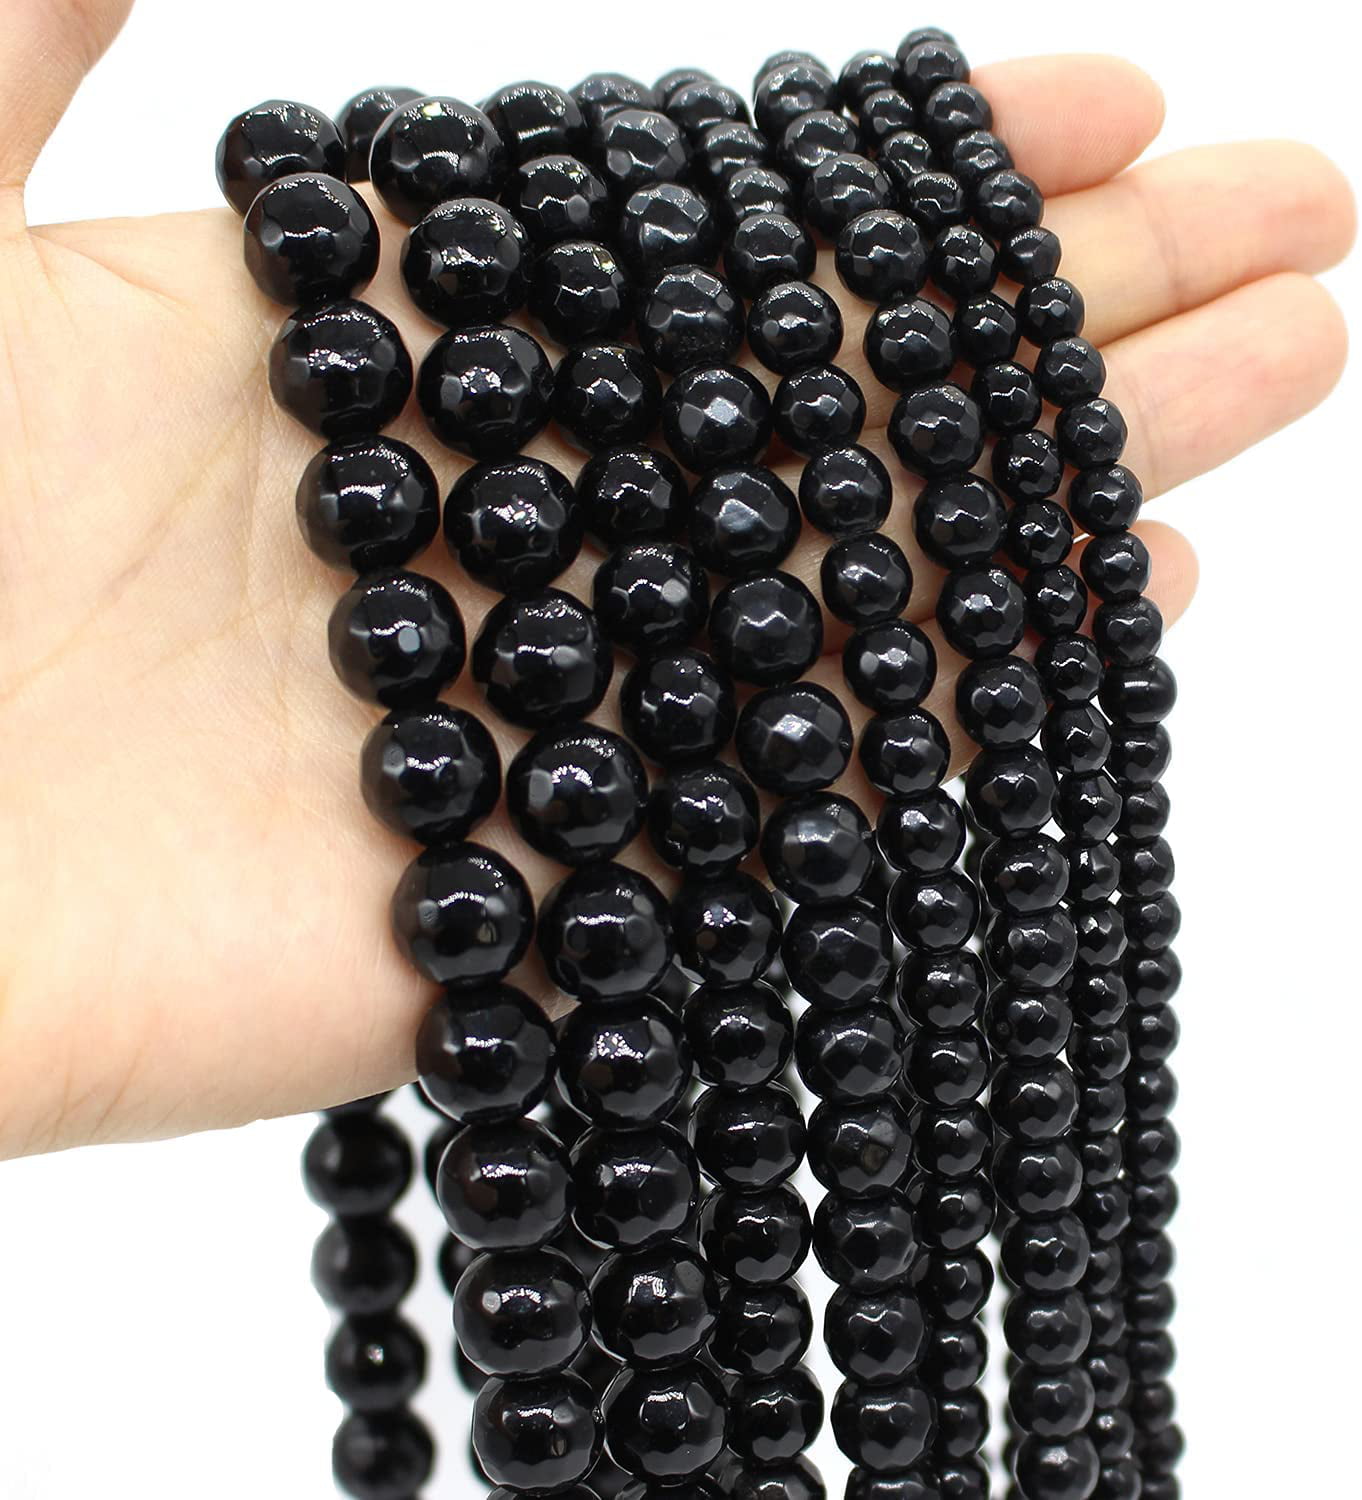 10 Strands Round Natural Black Agate Stone Beads 6mm 15" Gemstone Jewelry Loose 